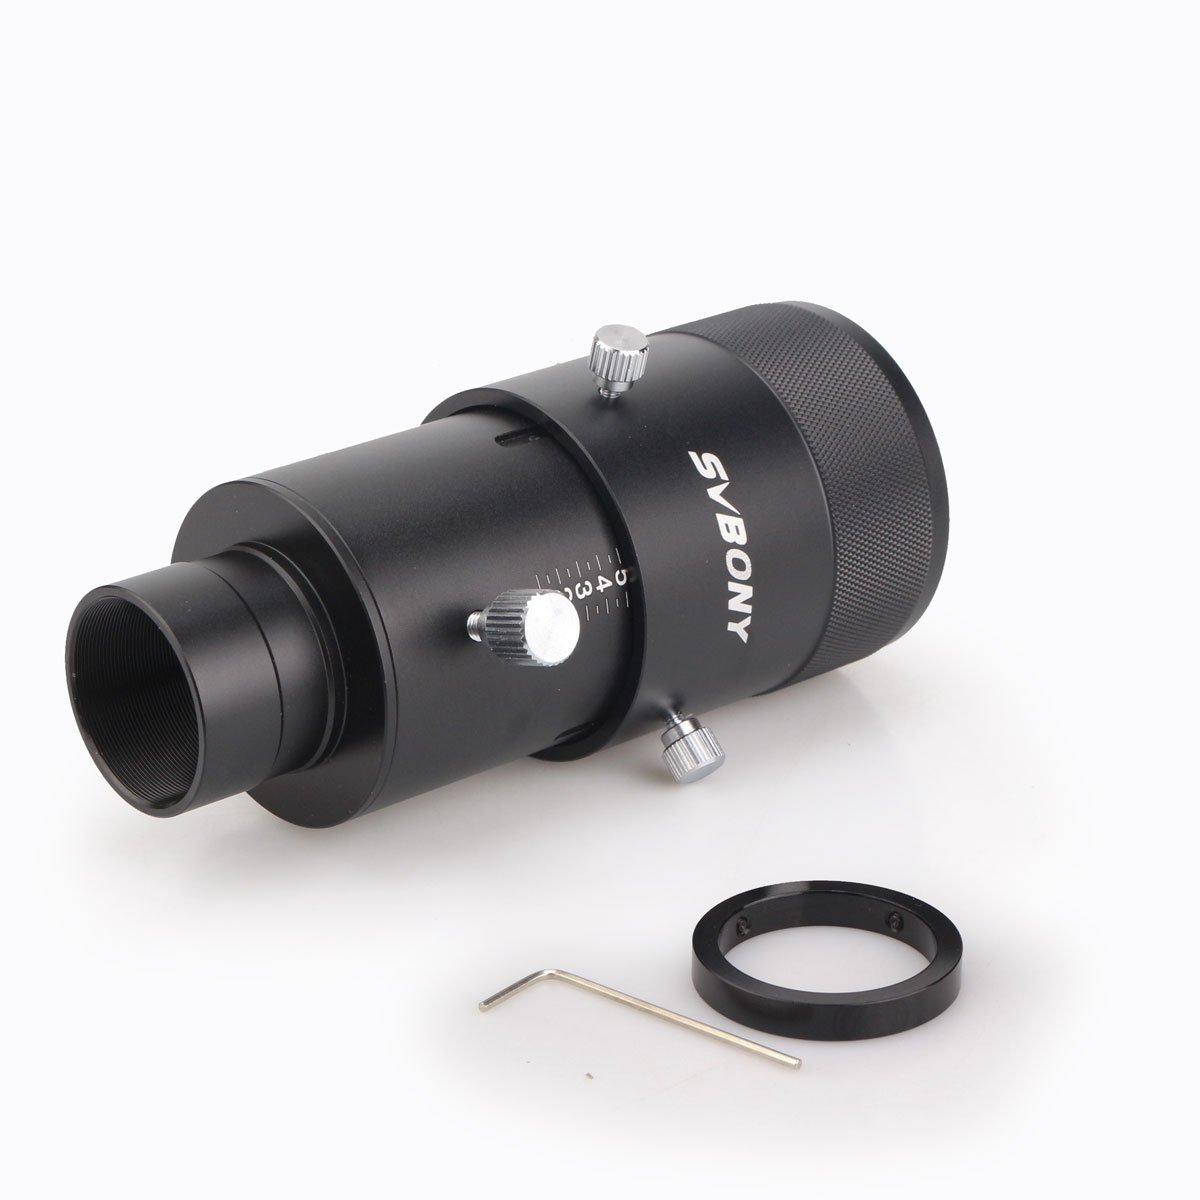 SVBONY-SV112-125quot-Fully-Metal-Deluxe-Variable-Eyepiece-Projection-Kit-for-Telescopes-with-T-Ring--1842642-6